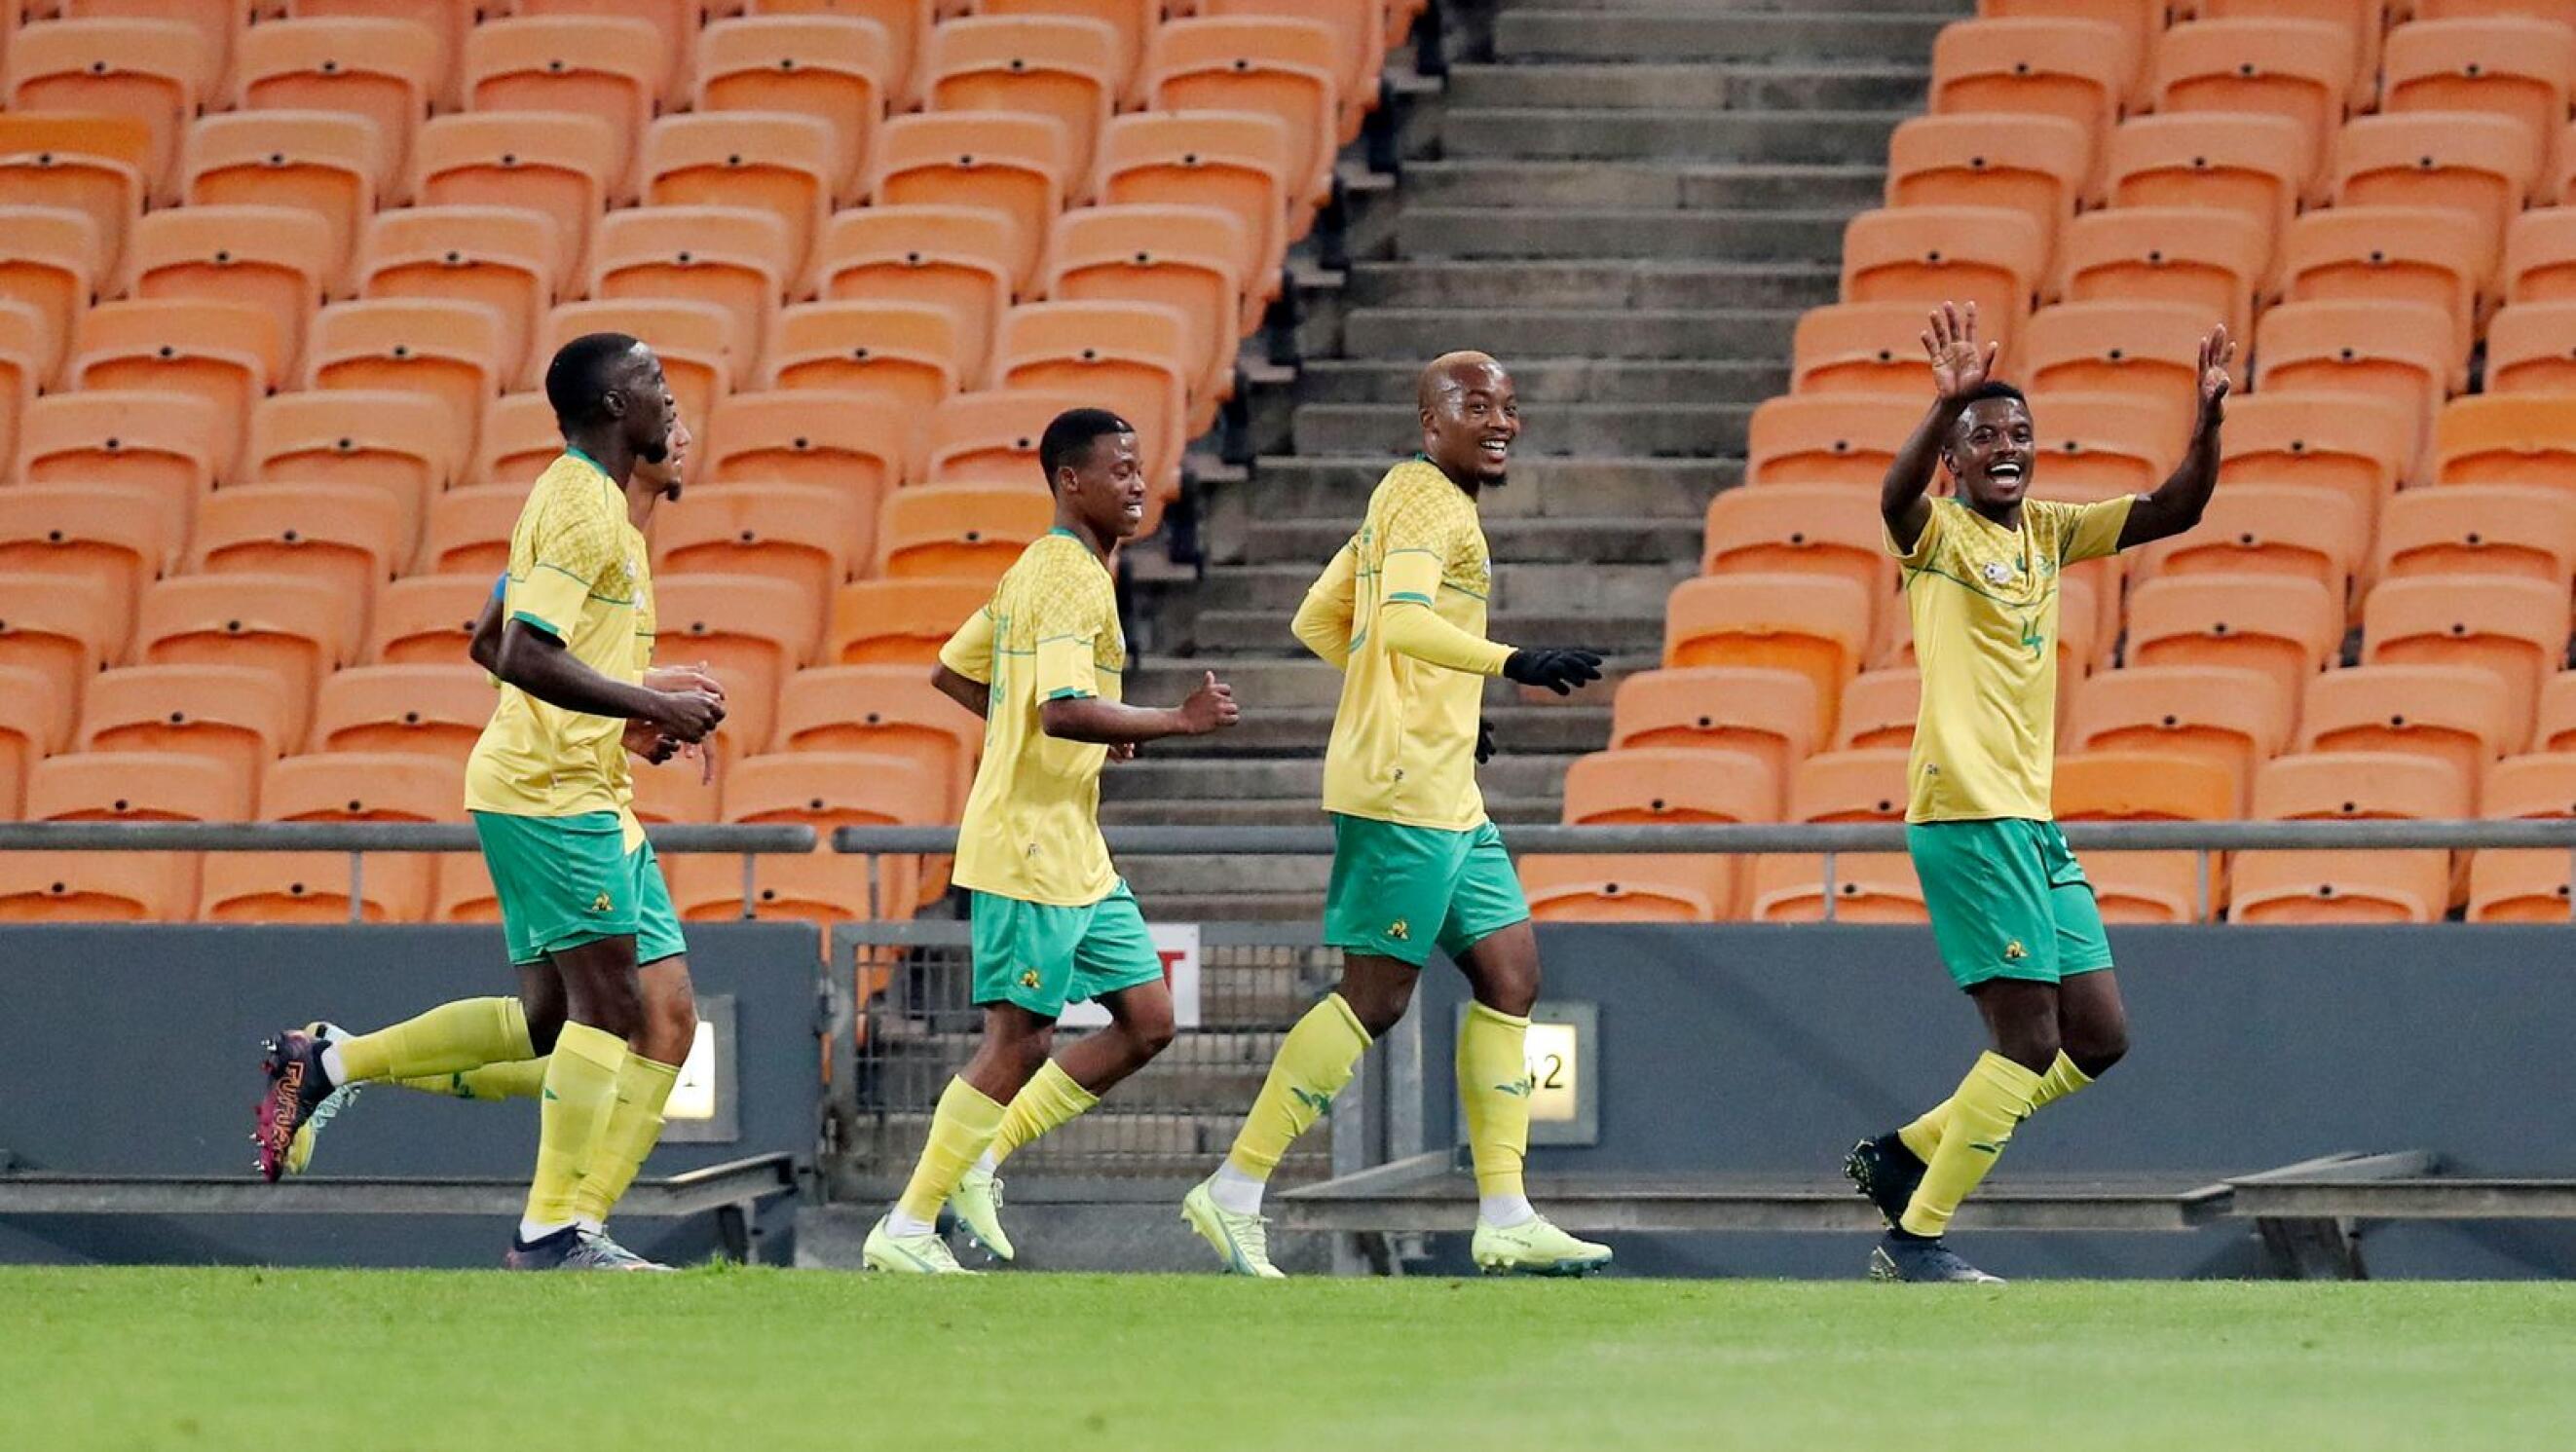 South Africa’s Teboho Mokoena celebrates with teammates after scoring a goal during their friendly international match against Botswana at FNB Stadium in Johannesburg on Tuesday